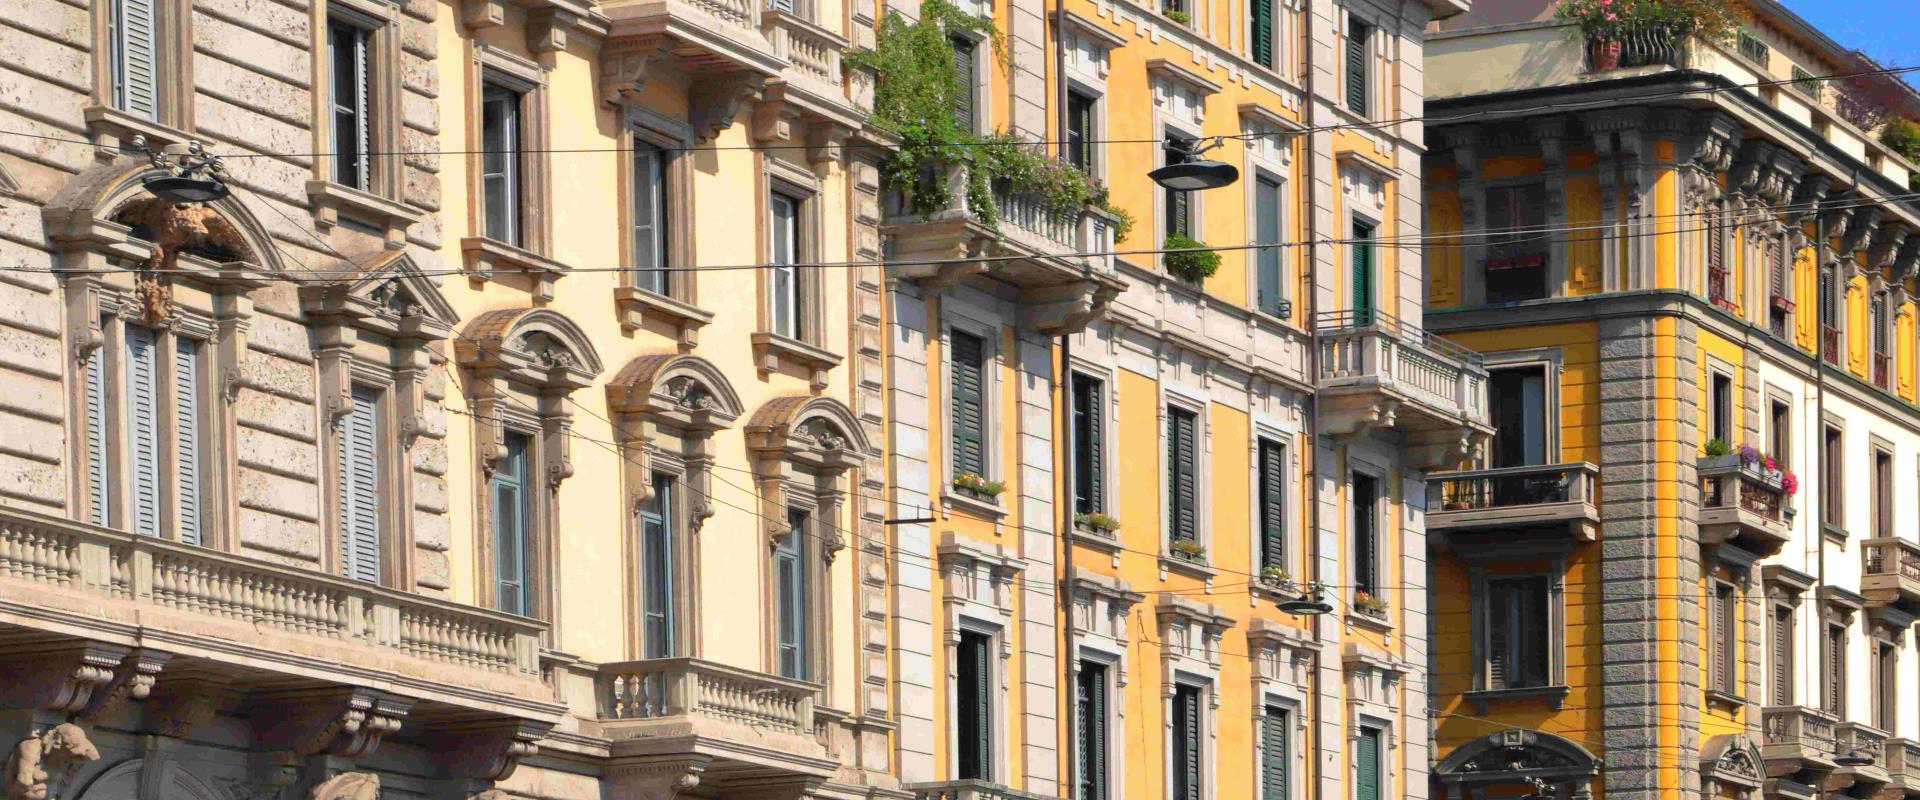 Stay at the Best Western Hotel City in Corso Buenos Aires and discover the longest shopping street in Milan!